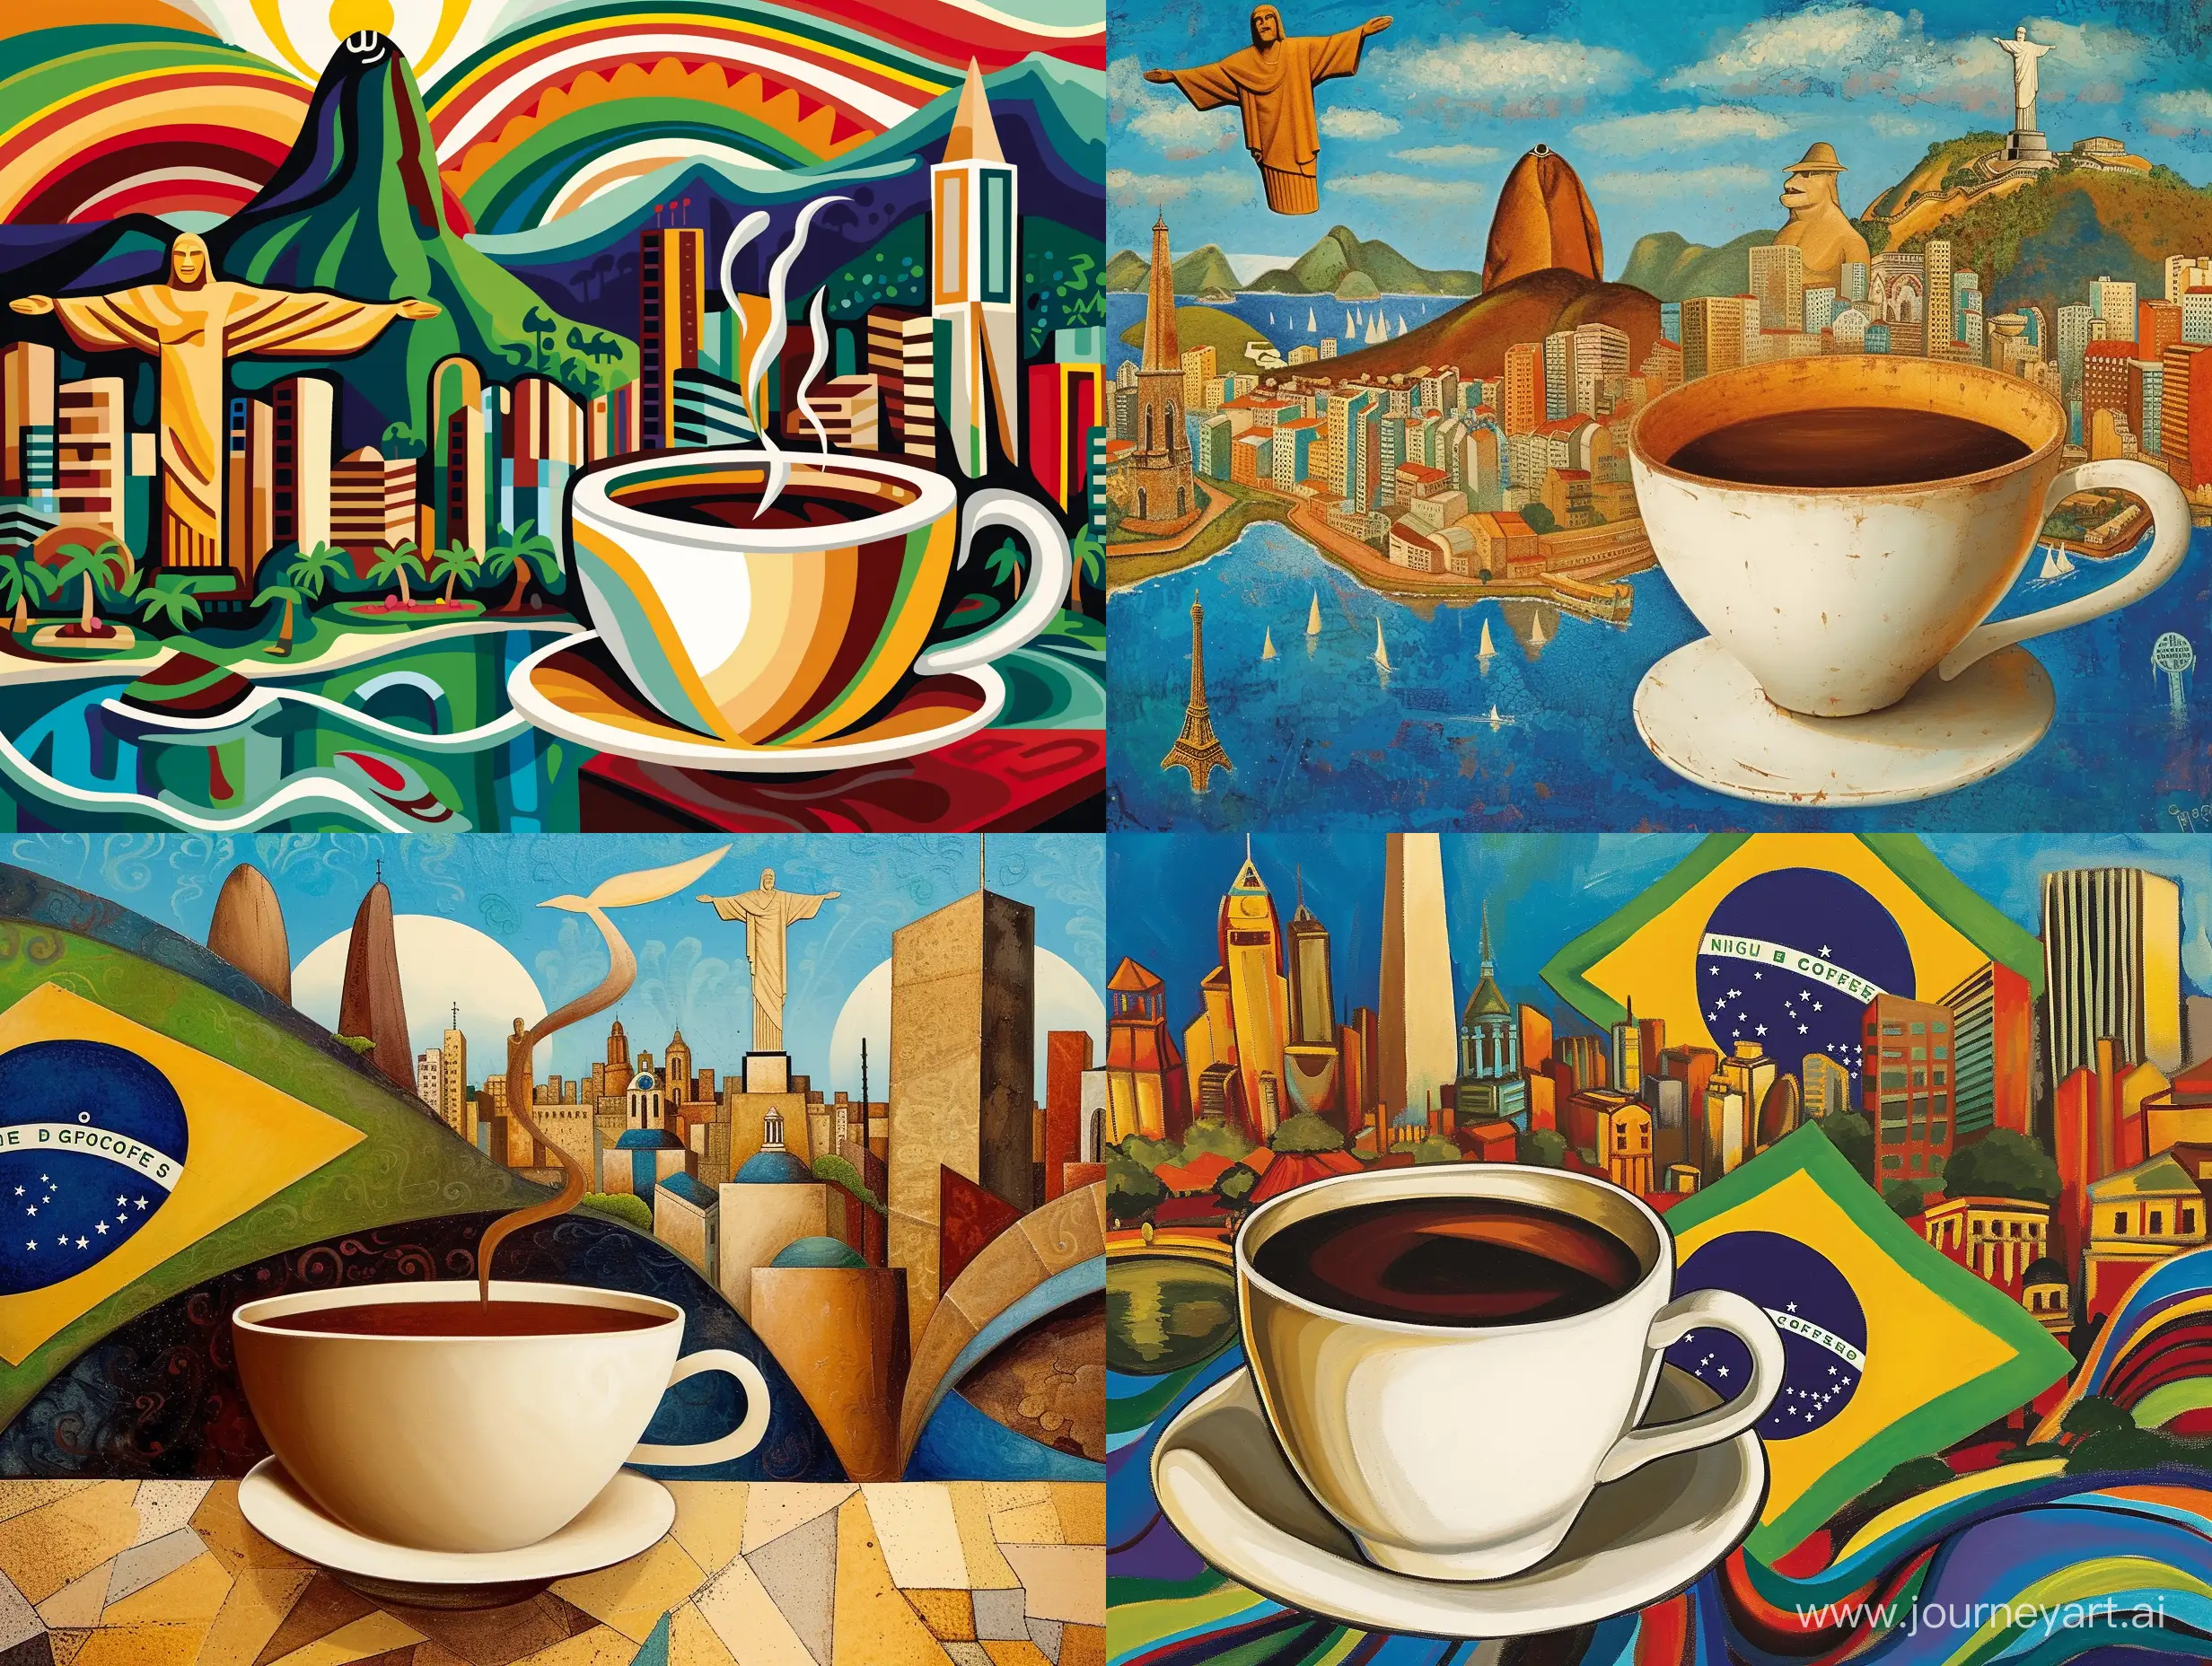 Elevated-Brazilian-Coffee-Soars-Amidst-Iconic-Landmarks-in-PicassoInspired-Composition